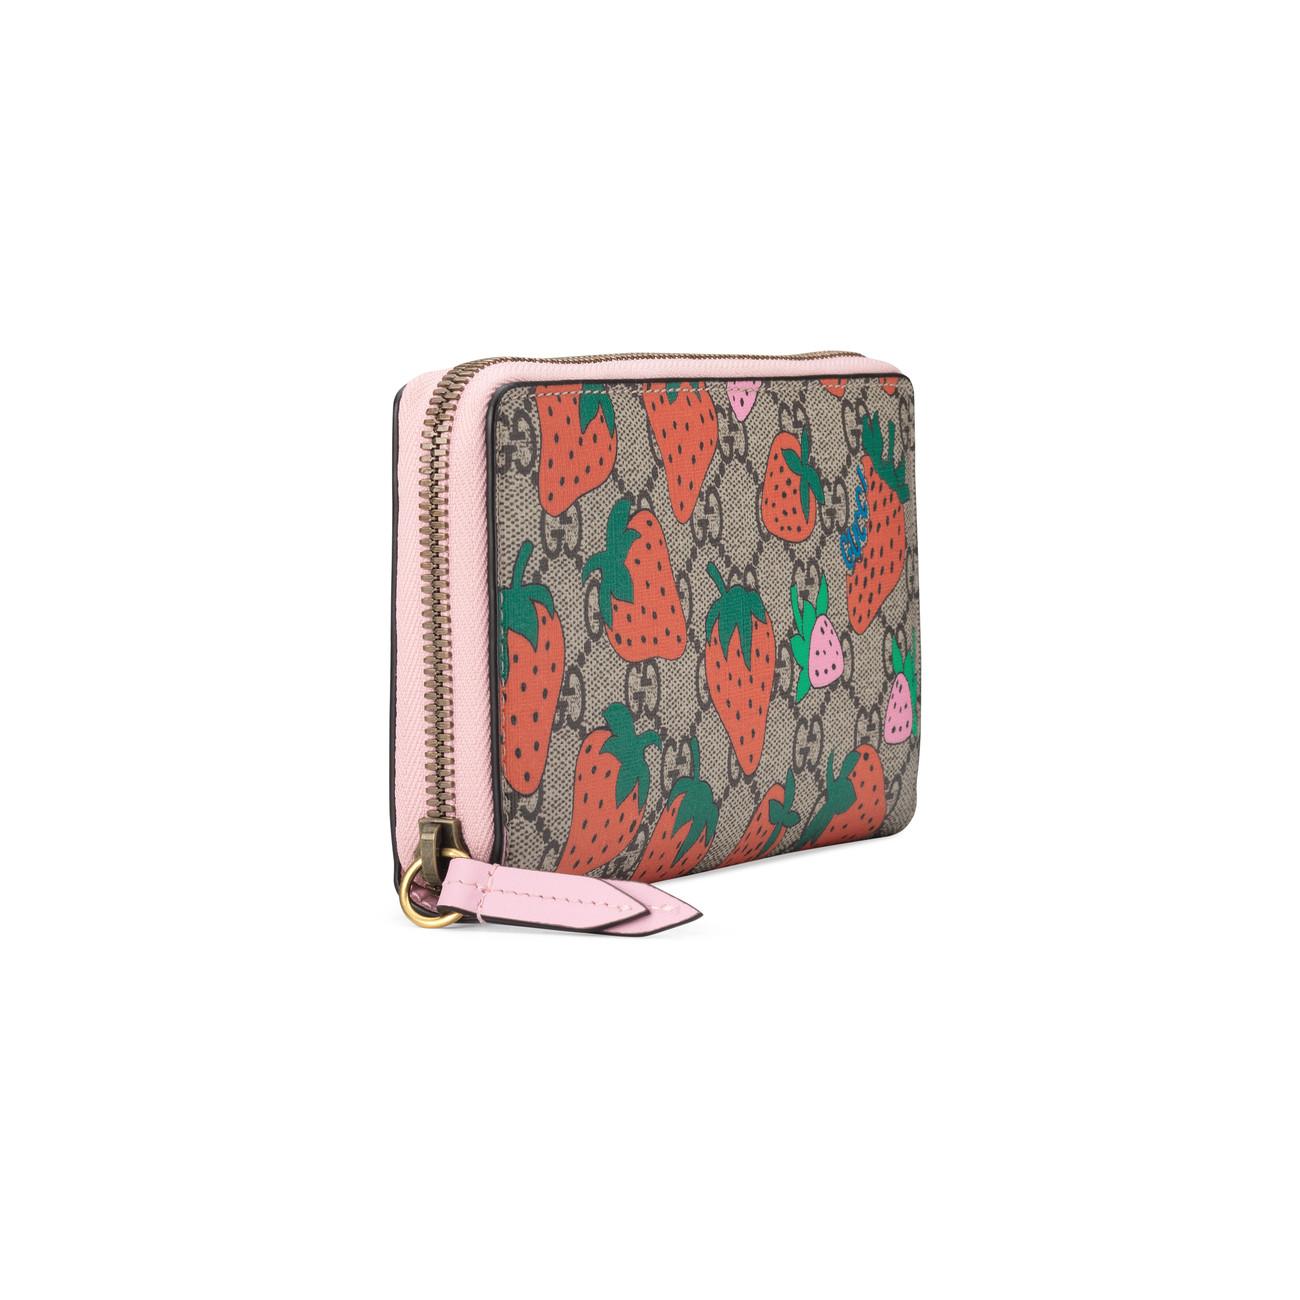 Gucci Canvas Strawberry Print Gg Supreme Wallet On A Chain in Pink - Lyst